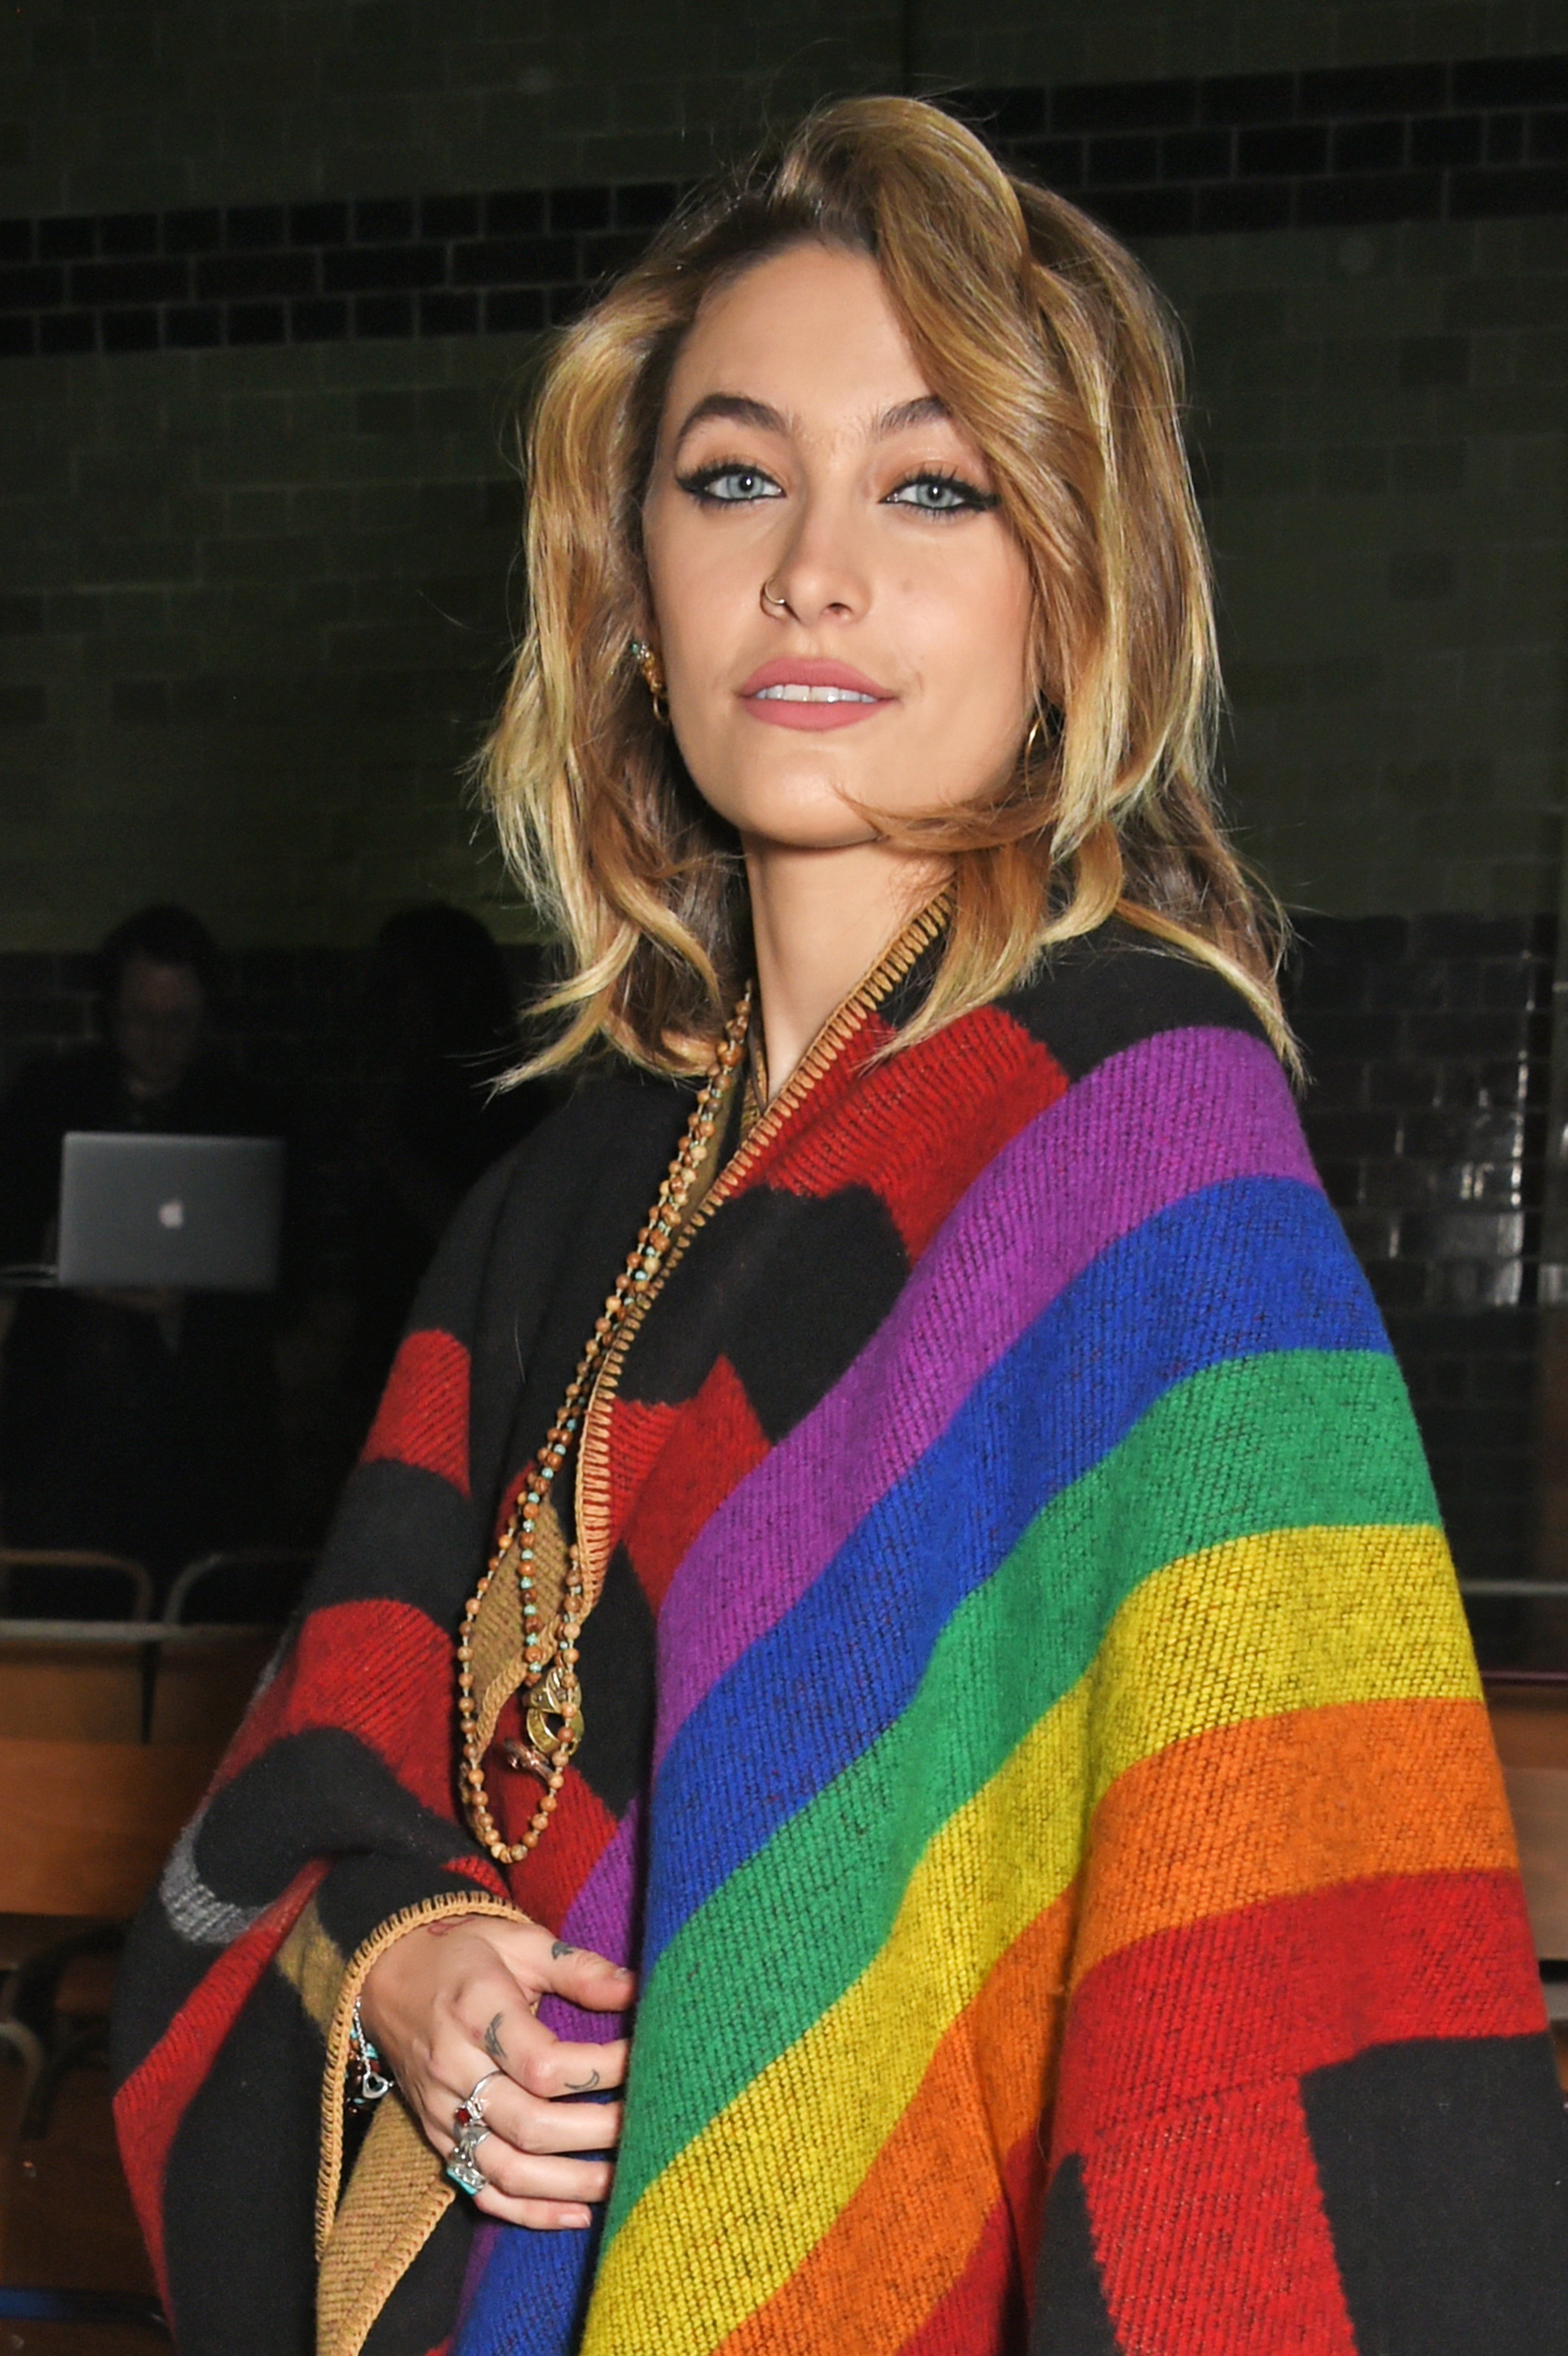 Paris Jackson wearing Burberry at the Burberry February 2018 show during London Fashion Week at Dimco Buildings on February 17, 2018, in London, England. | Source: Getty Images.